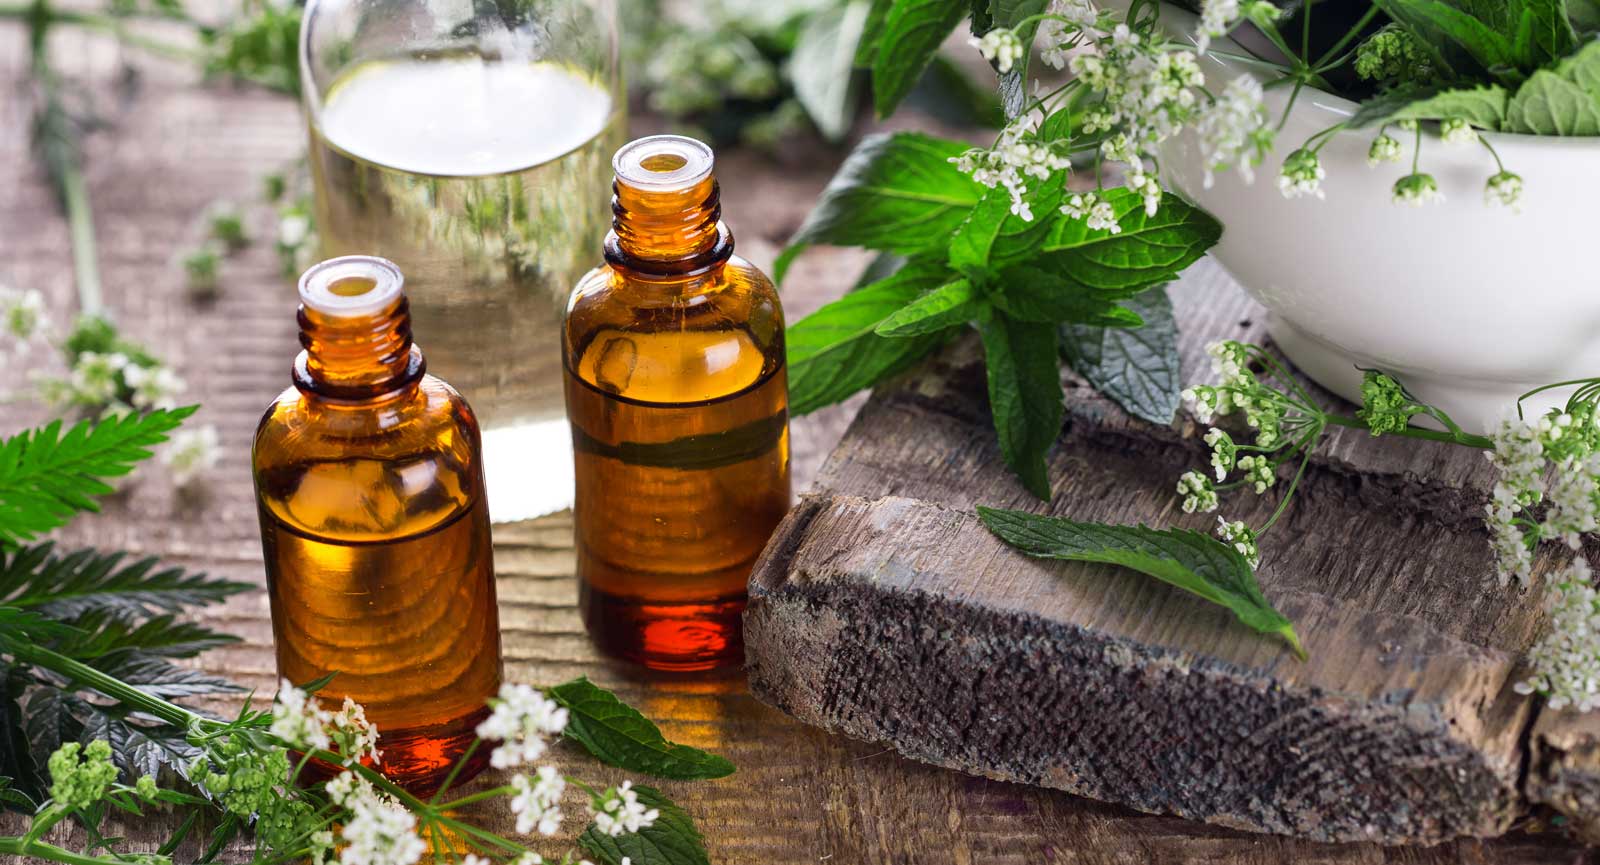 Two bottles of essential oils